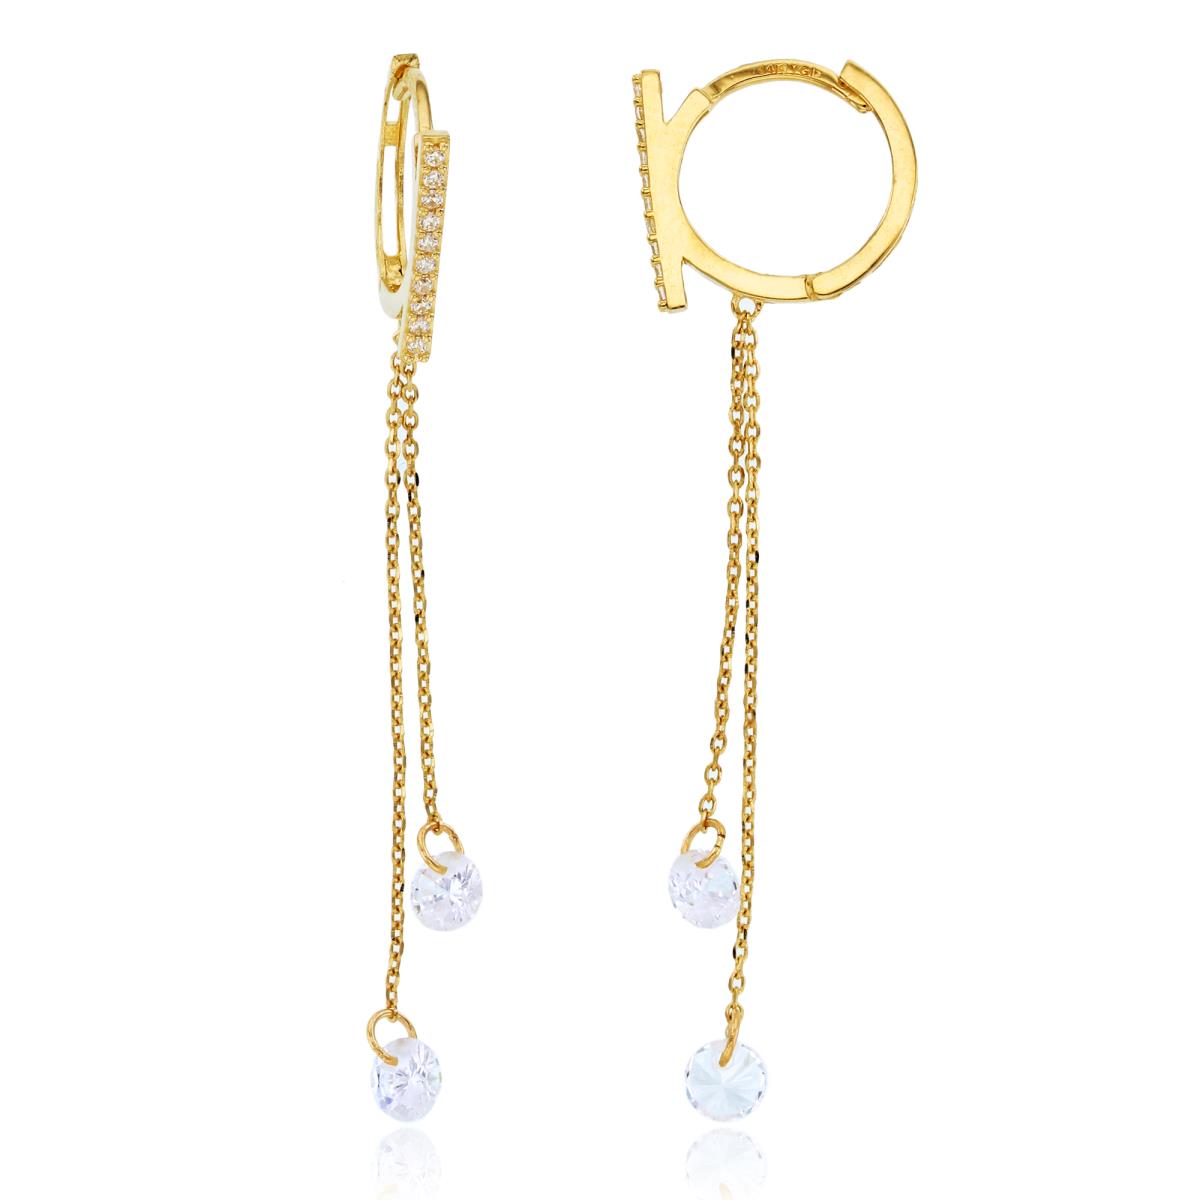 14K Yellow Gold 4mm Rnd Briolette CZ Dangling on Chain with Huggie Earrings